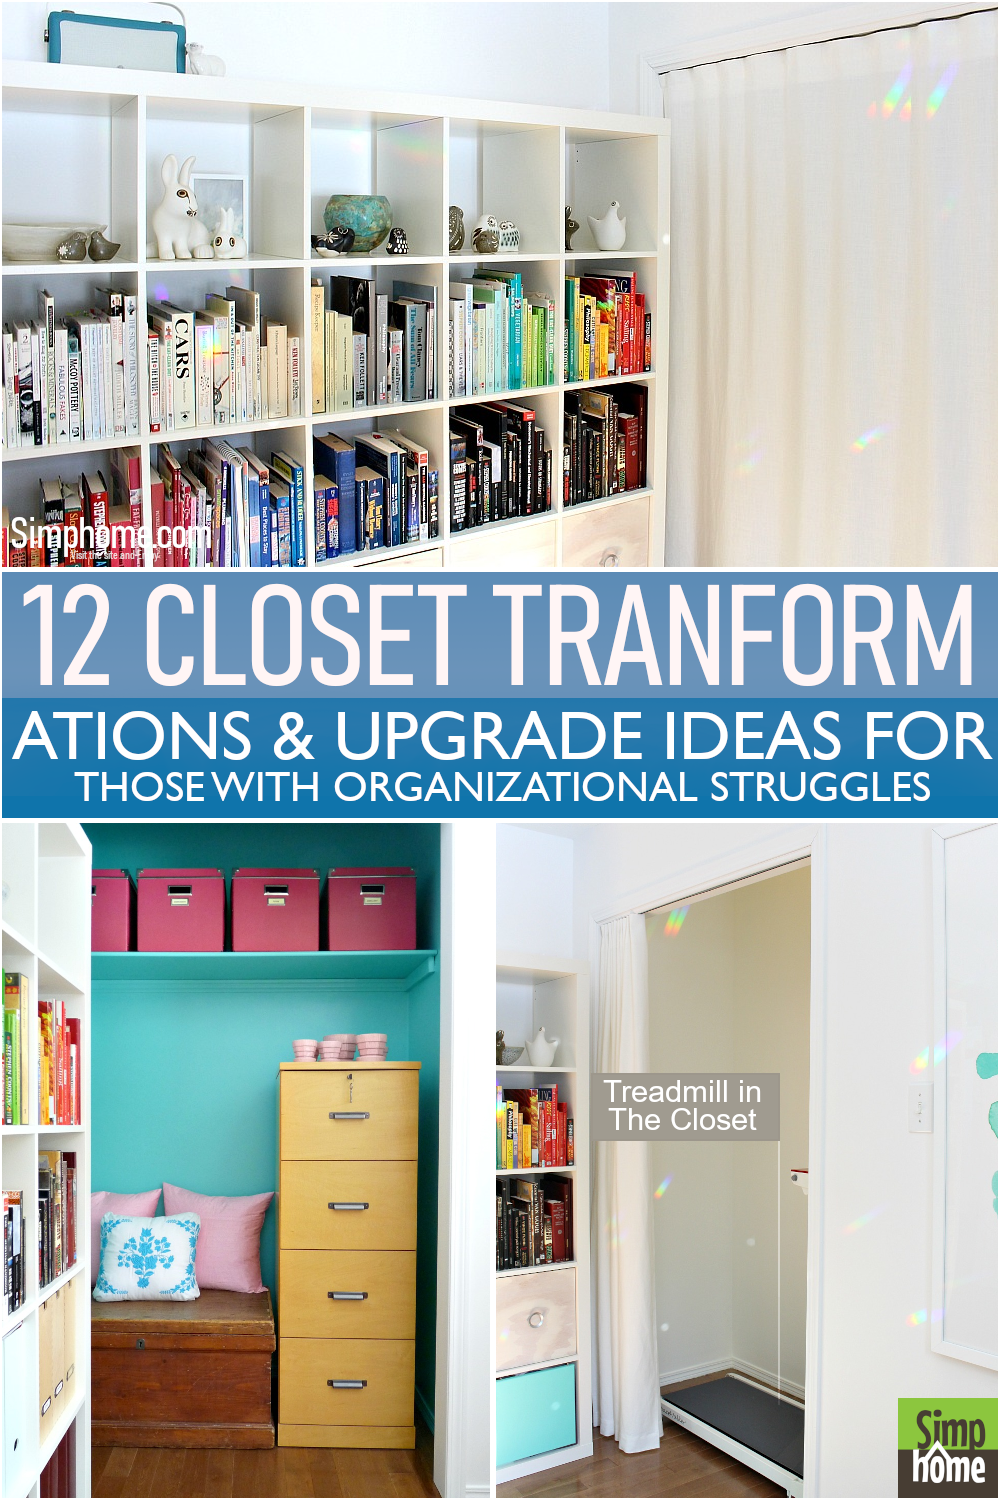 This is 12 Closet transformation poster